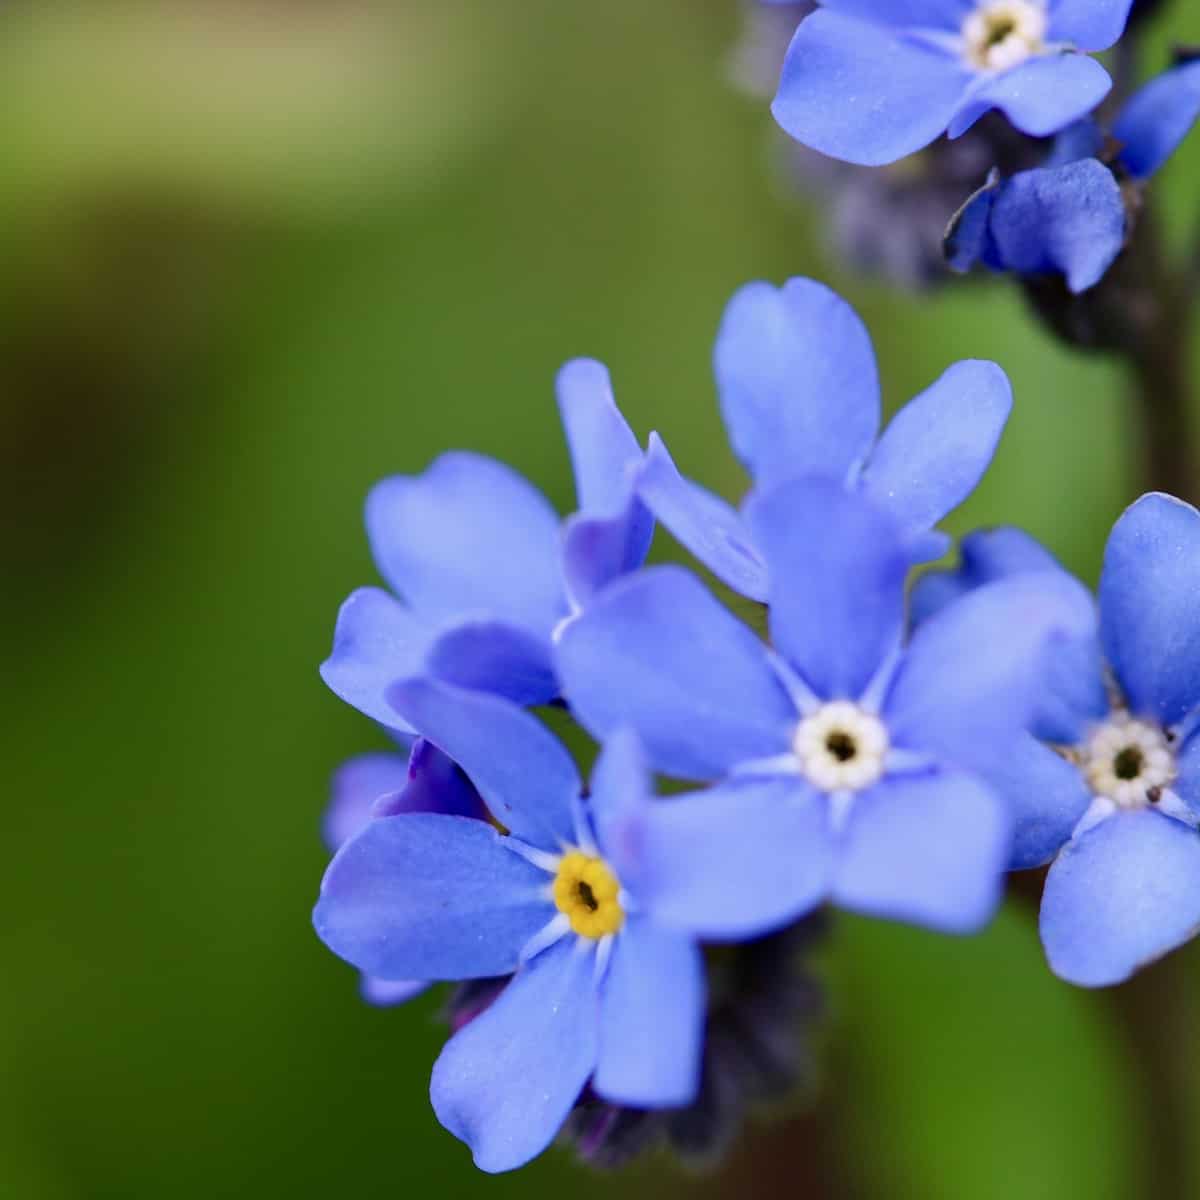 blue forget me not flowers